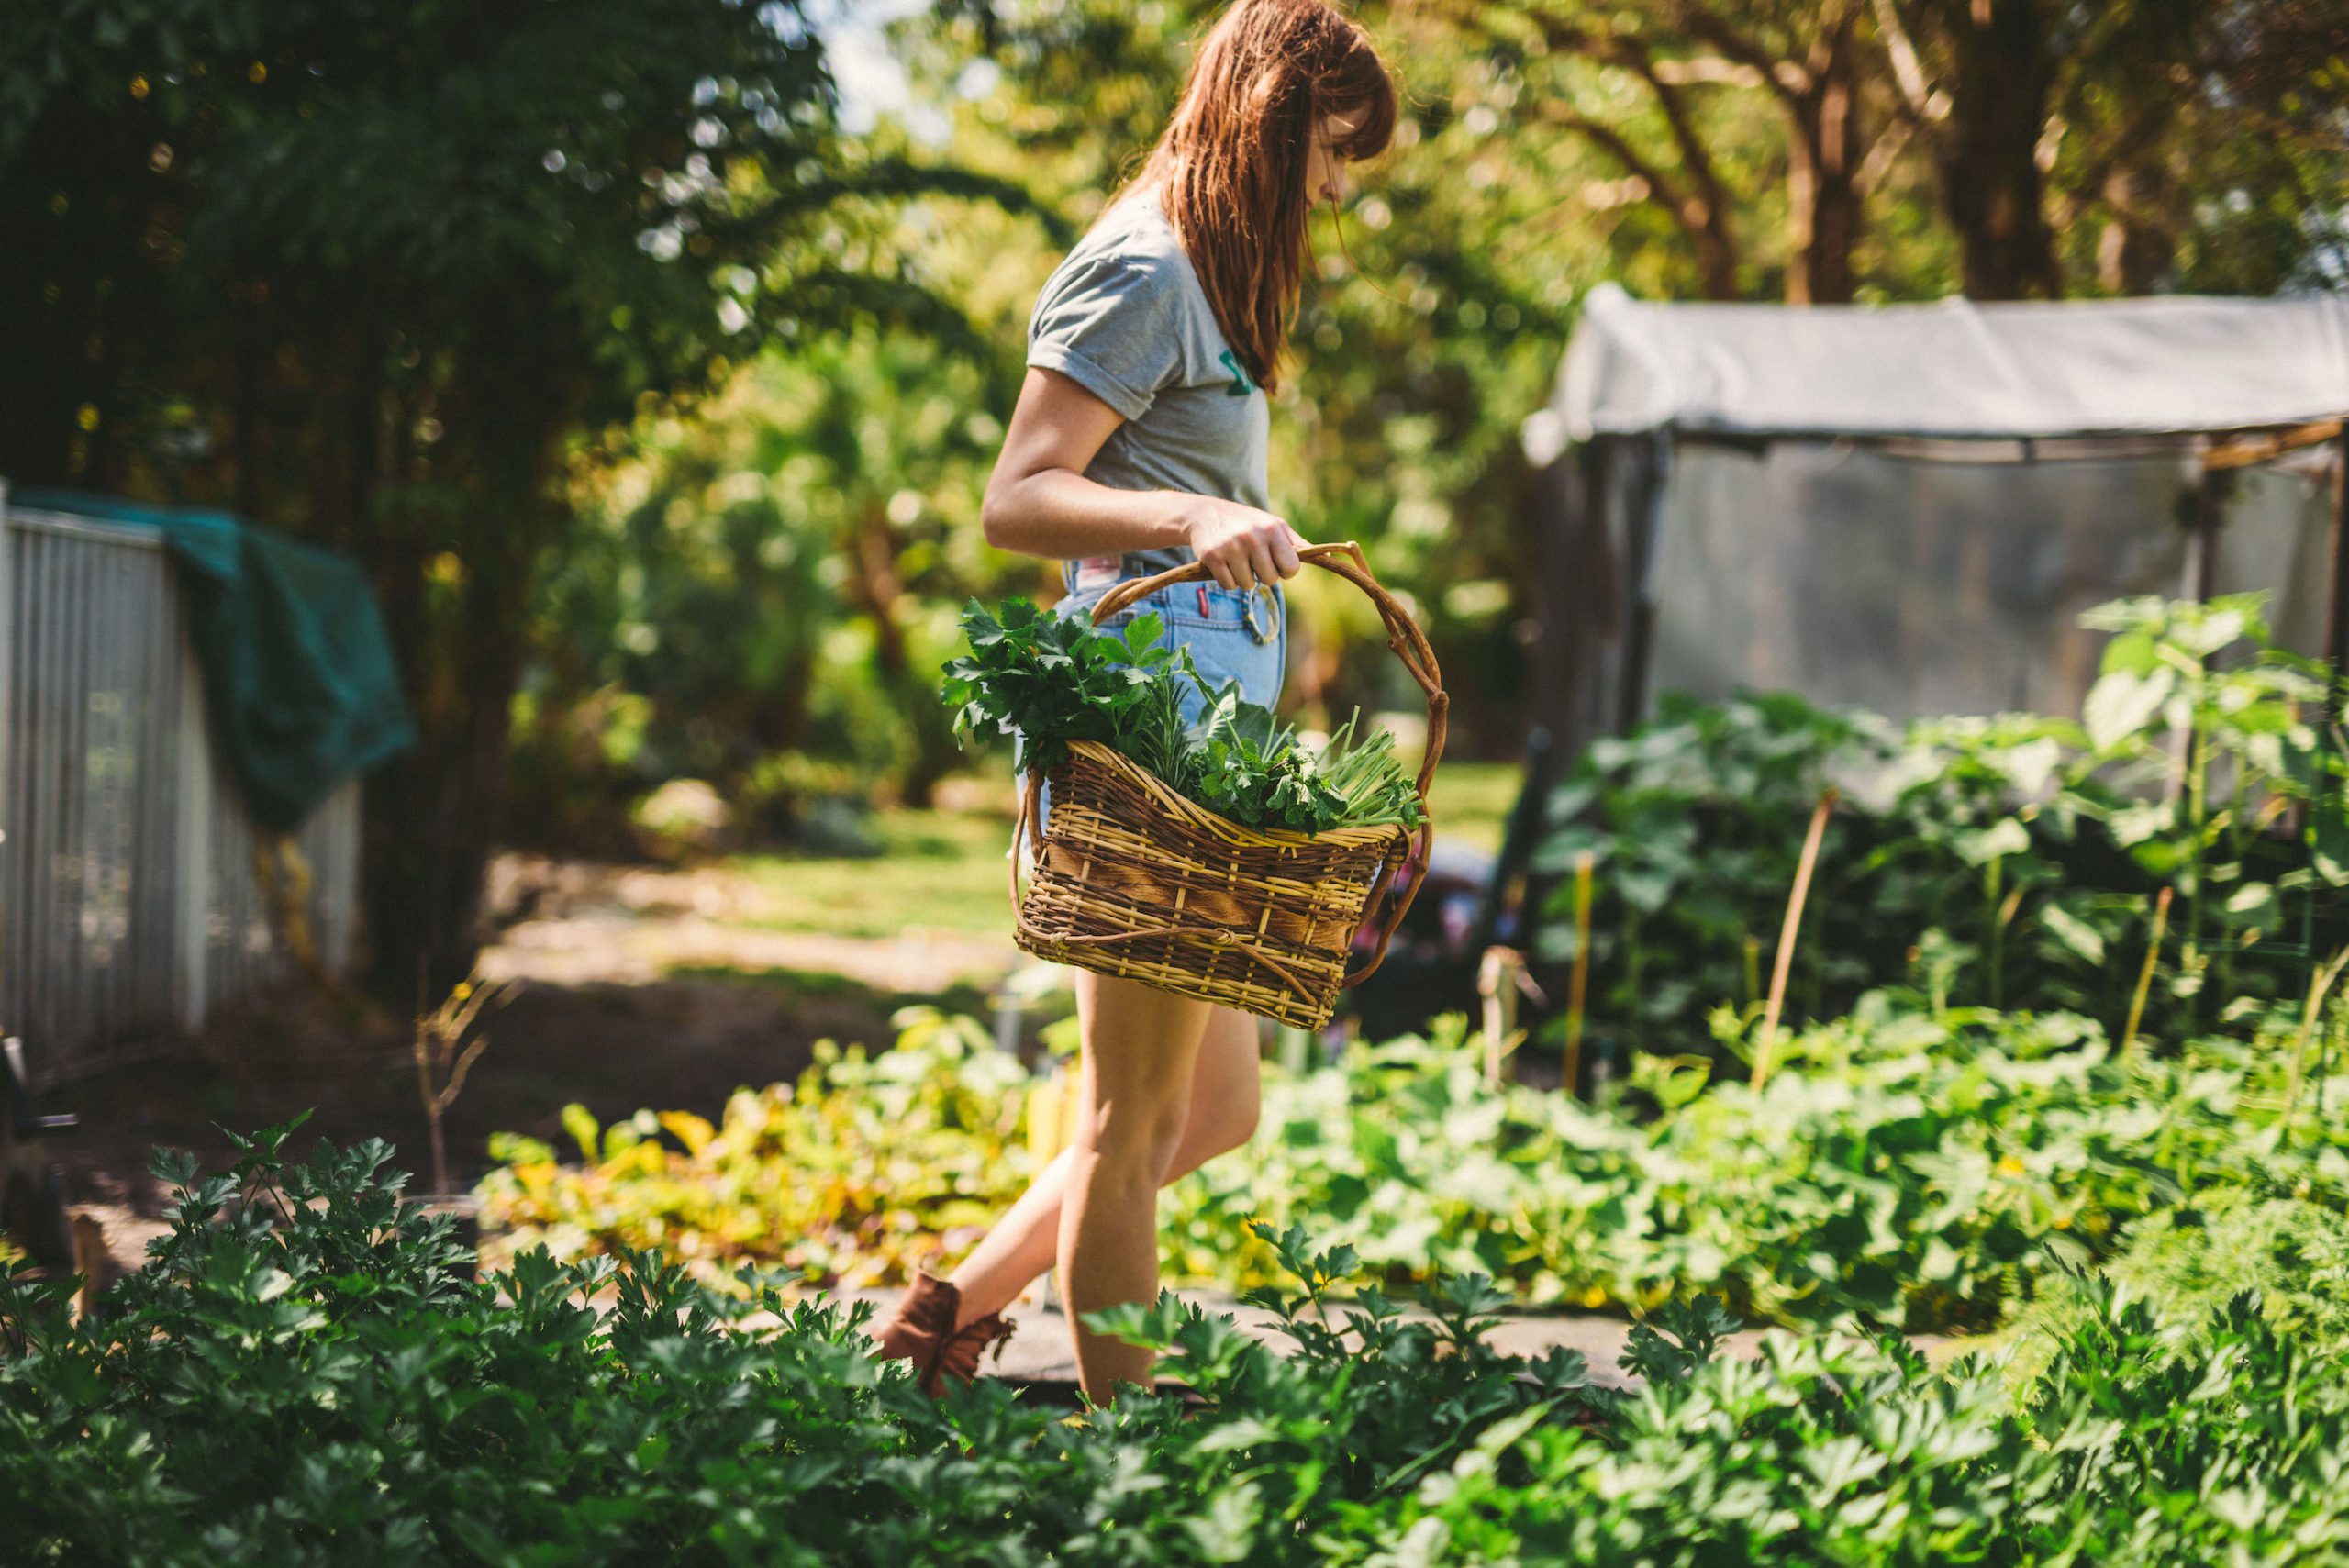 IU C&I Studios Portfolio and Page Fresh First Website Header Side profile of a woman with reddish brown hair walking through a garden holding a basket filled with produce